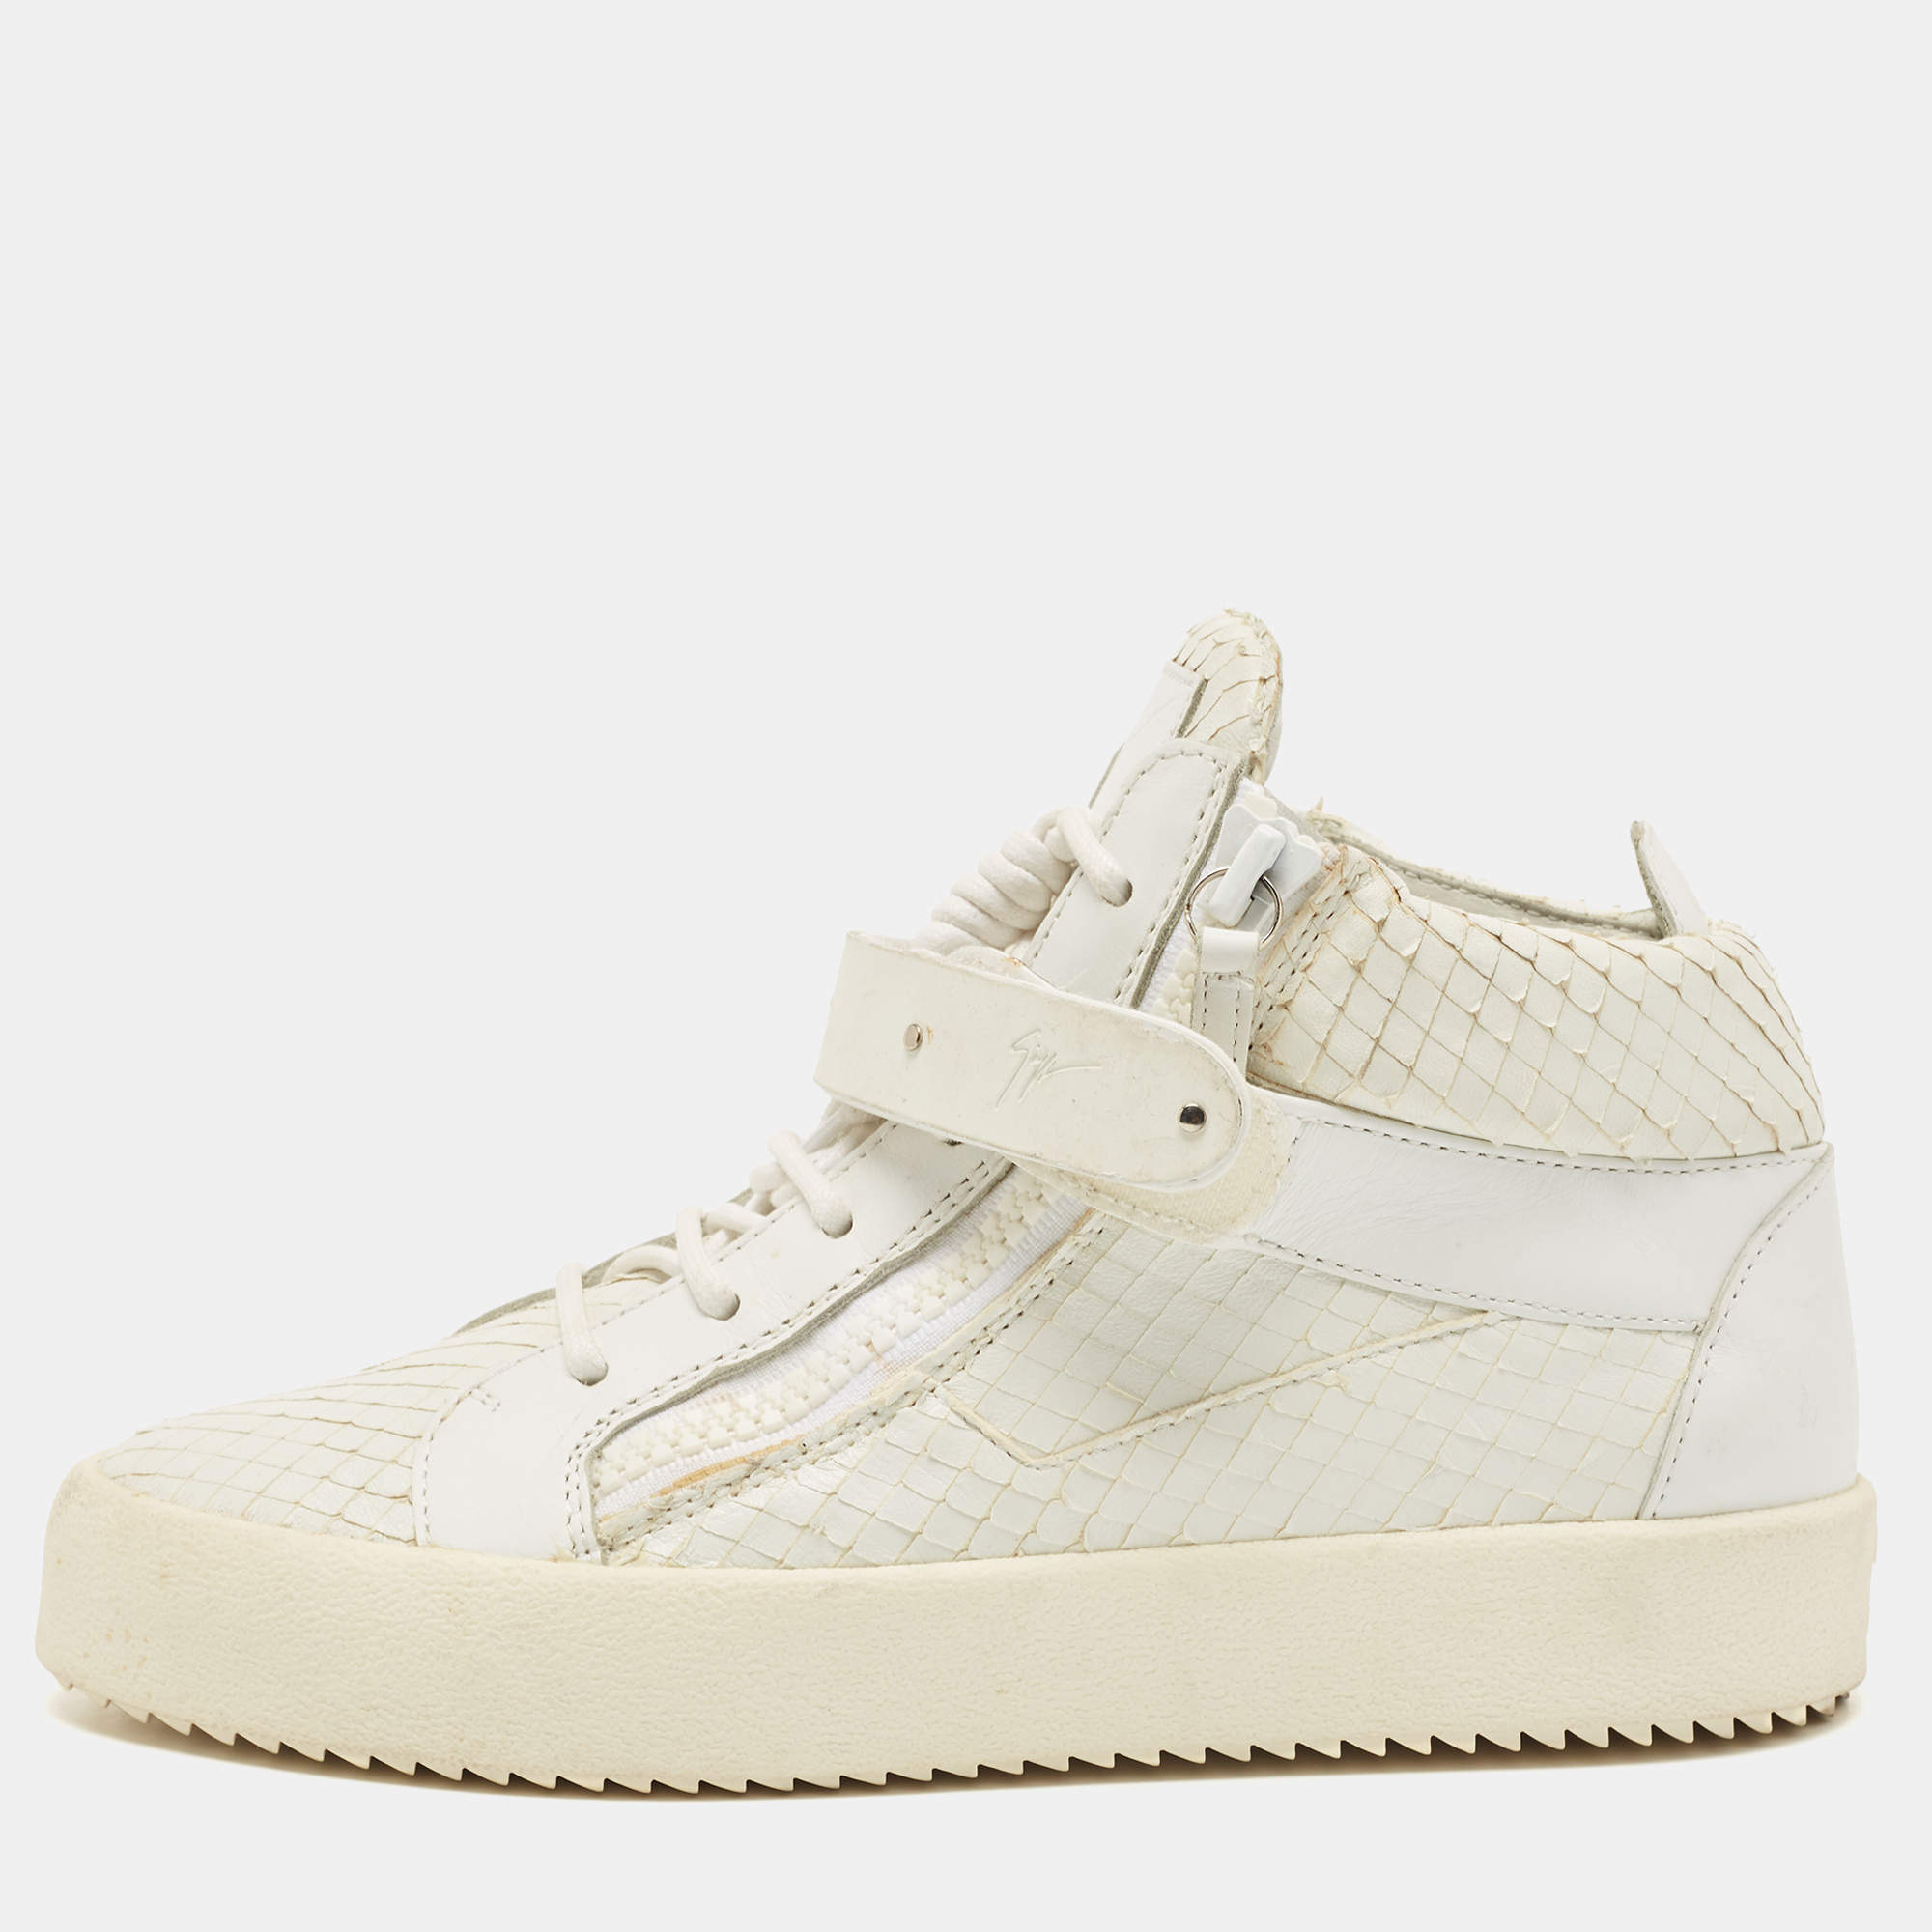 Giuseppe Zanotti White Python Embossed and Leather Coby High Top Sneakers  Size 41